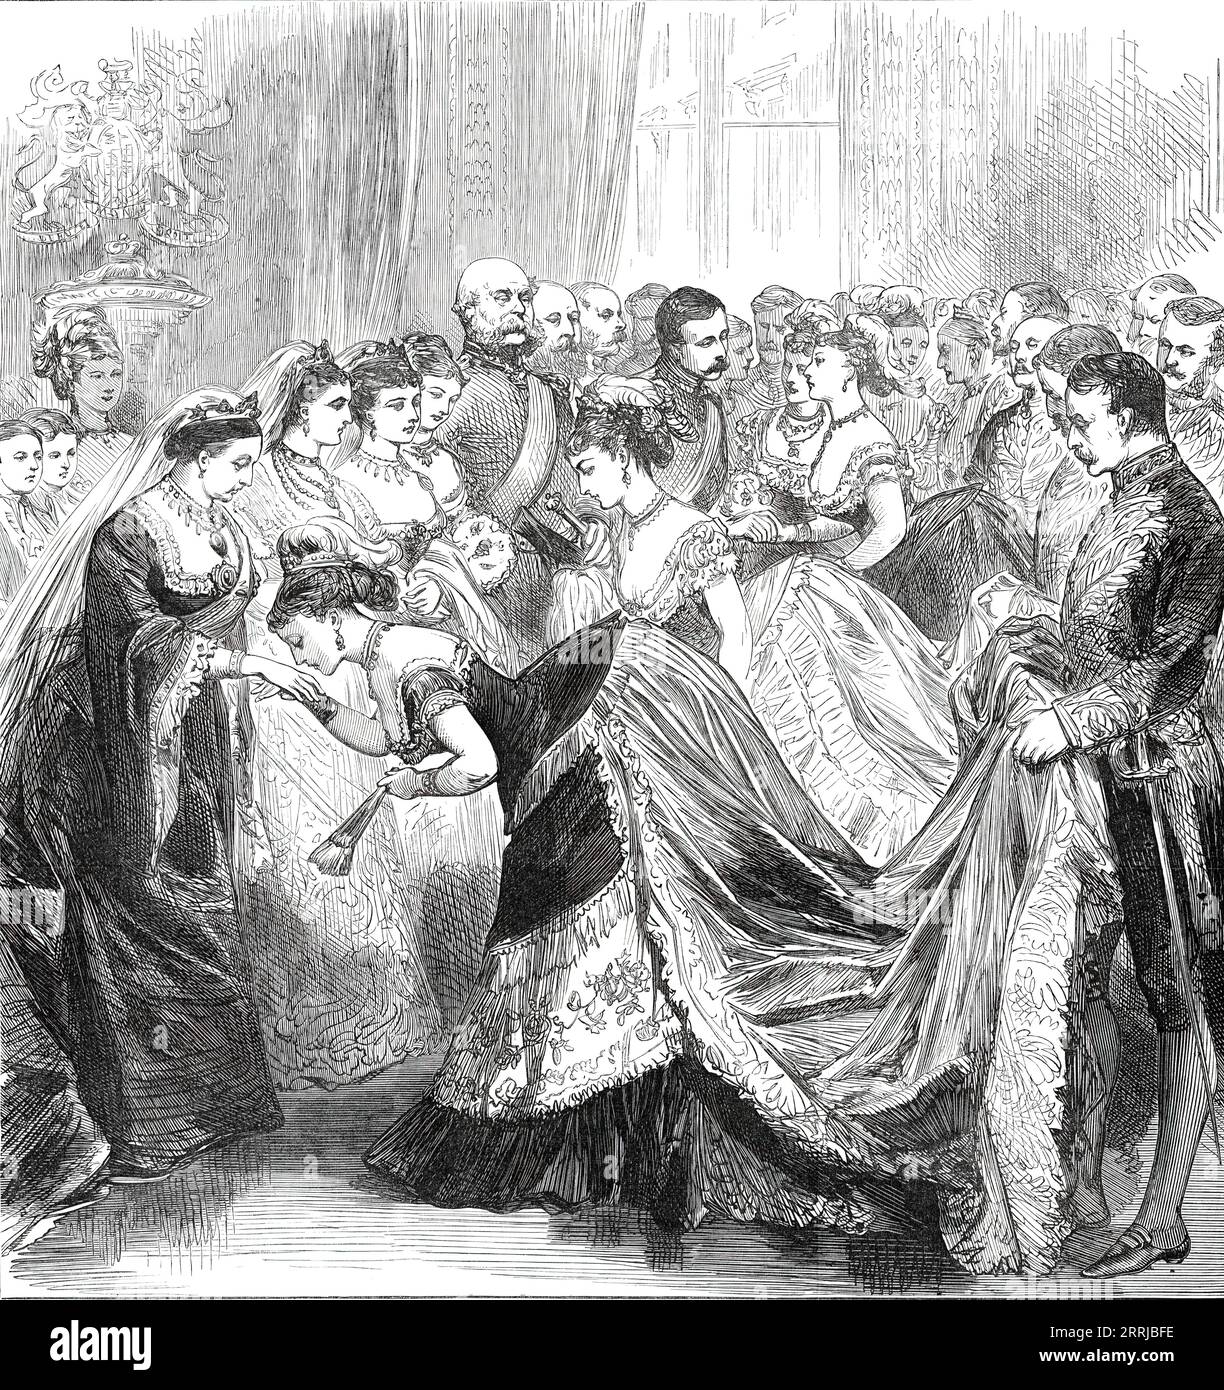 Her Majesty's Drawingroom at Buckingham Palace, 1876. The '...ceremony of personally introducing ladies to the Queen, beside whom stand their Royal Highnesses the Princess of Wales, Princess Louise (Marchioness of Lorne), and Princess Beatrice...The lady to be introduced to her Majesty was in each case presented by some lady of her own family or friends, who had previously been admitted to the Court...The Queen was attired in a dress of embroidered black satin, the black satin train of which was trimmed with tulle and crape; she wore a long white tulle veil, and on her head a diadem adorned wi Stock Photo